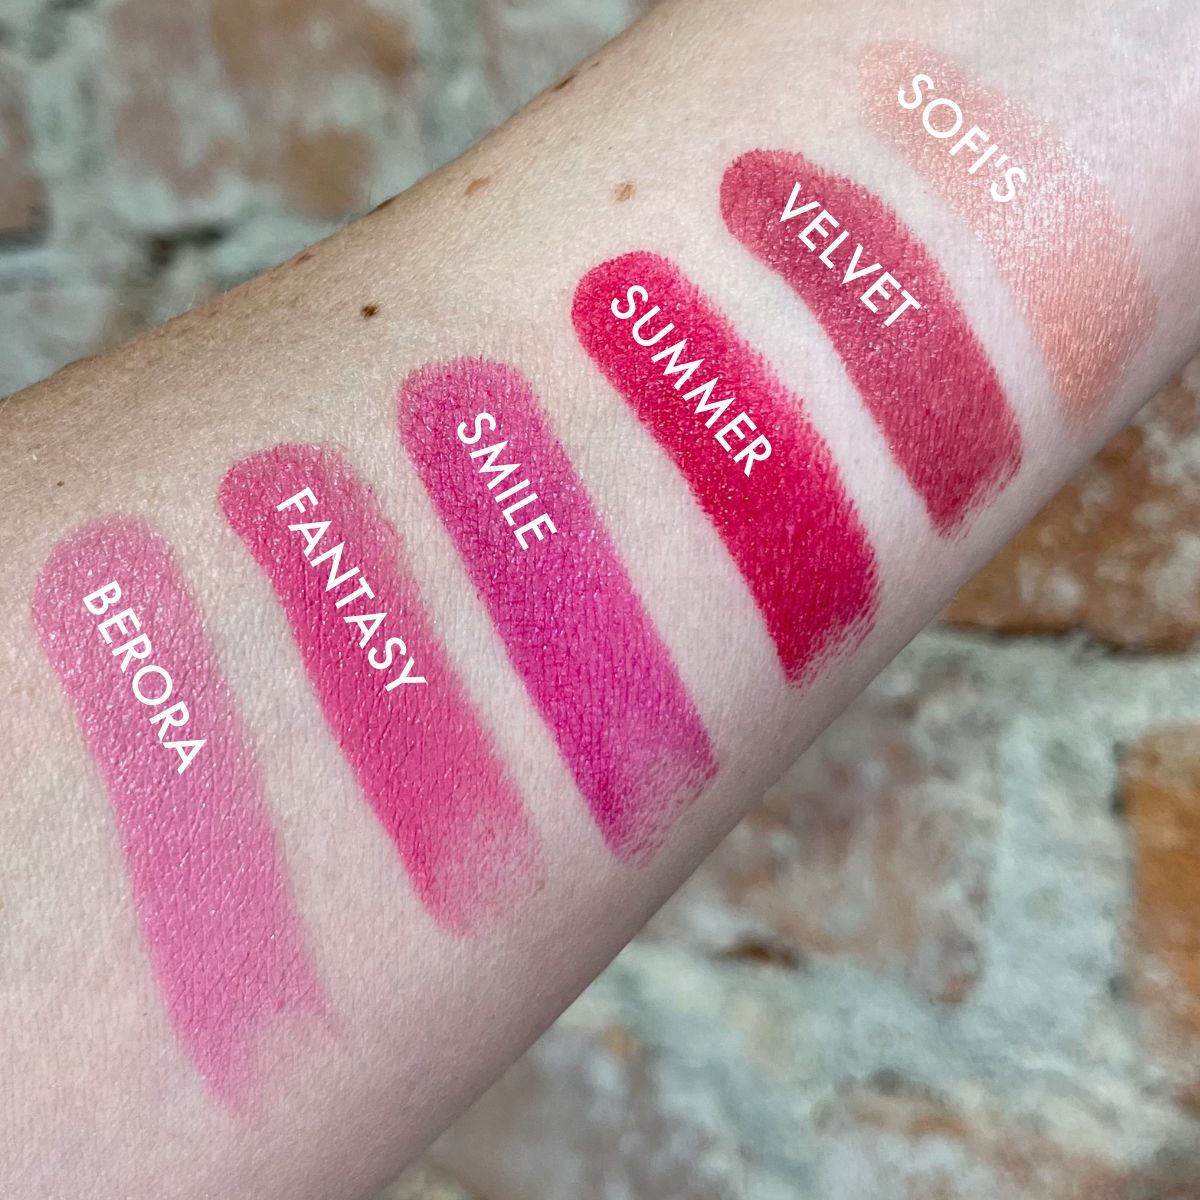 Pink Cream Lipstick Arm Swatches 1 Labeled 1200x1200